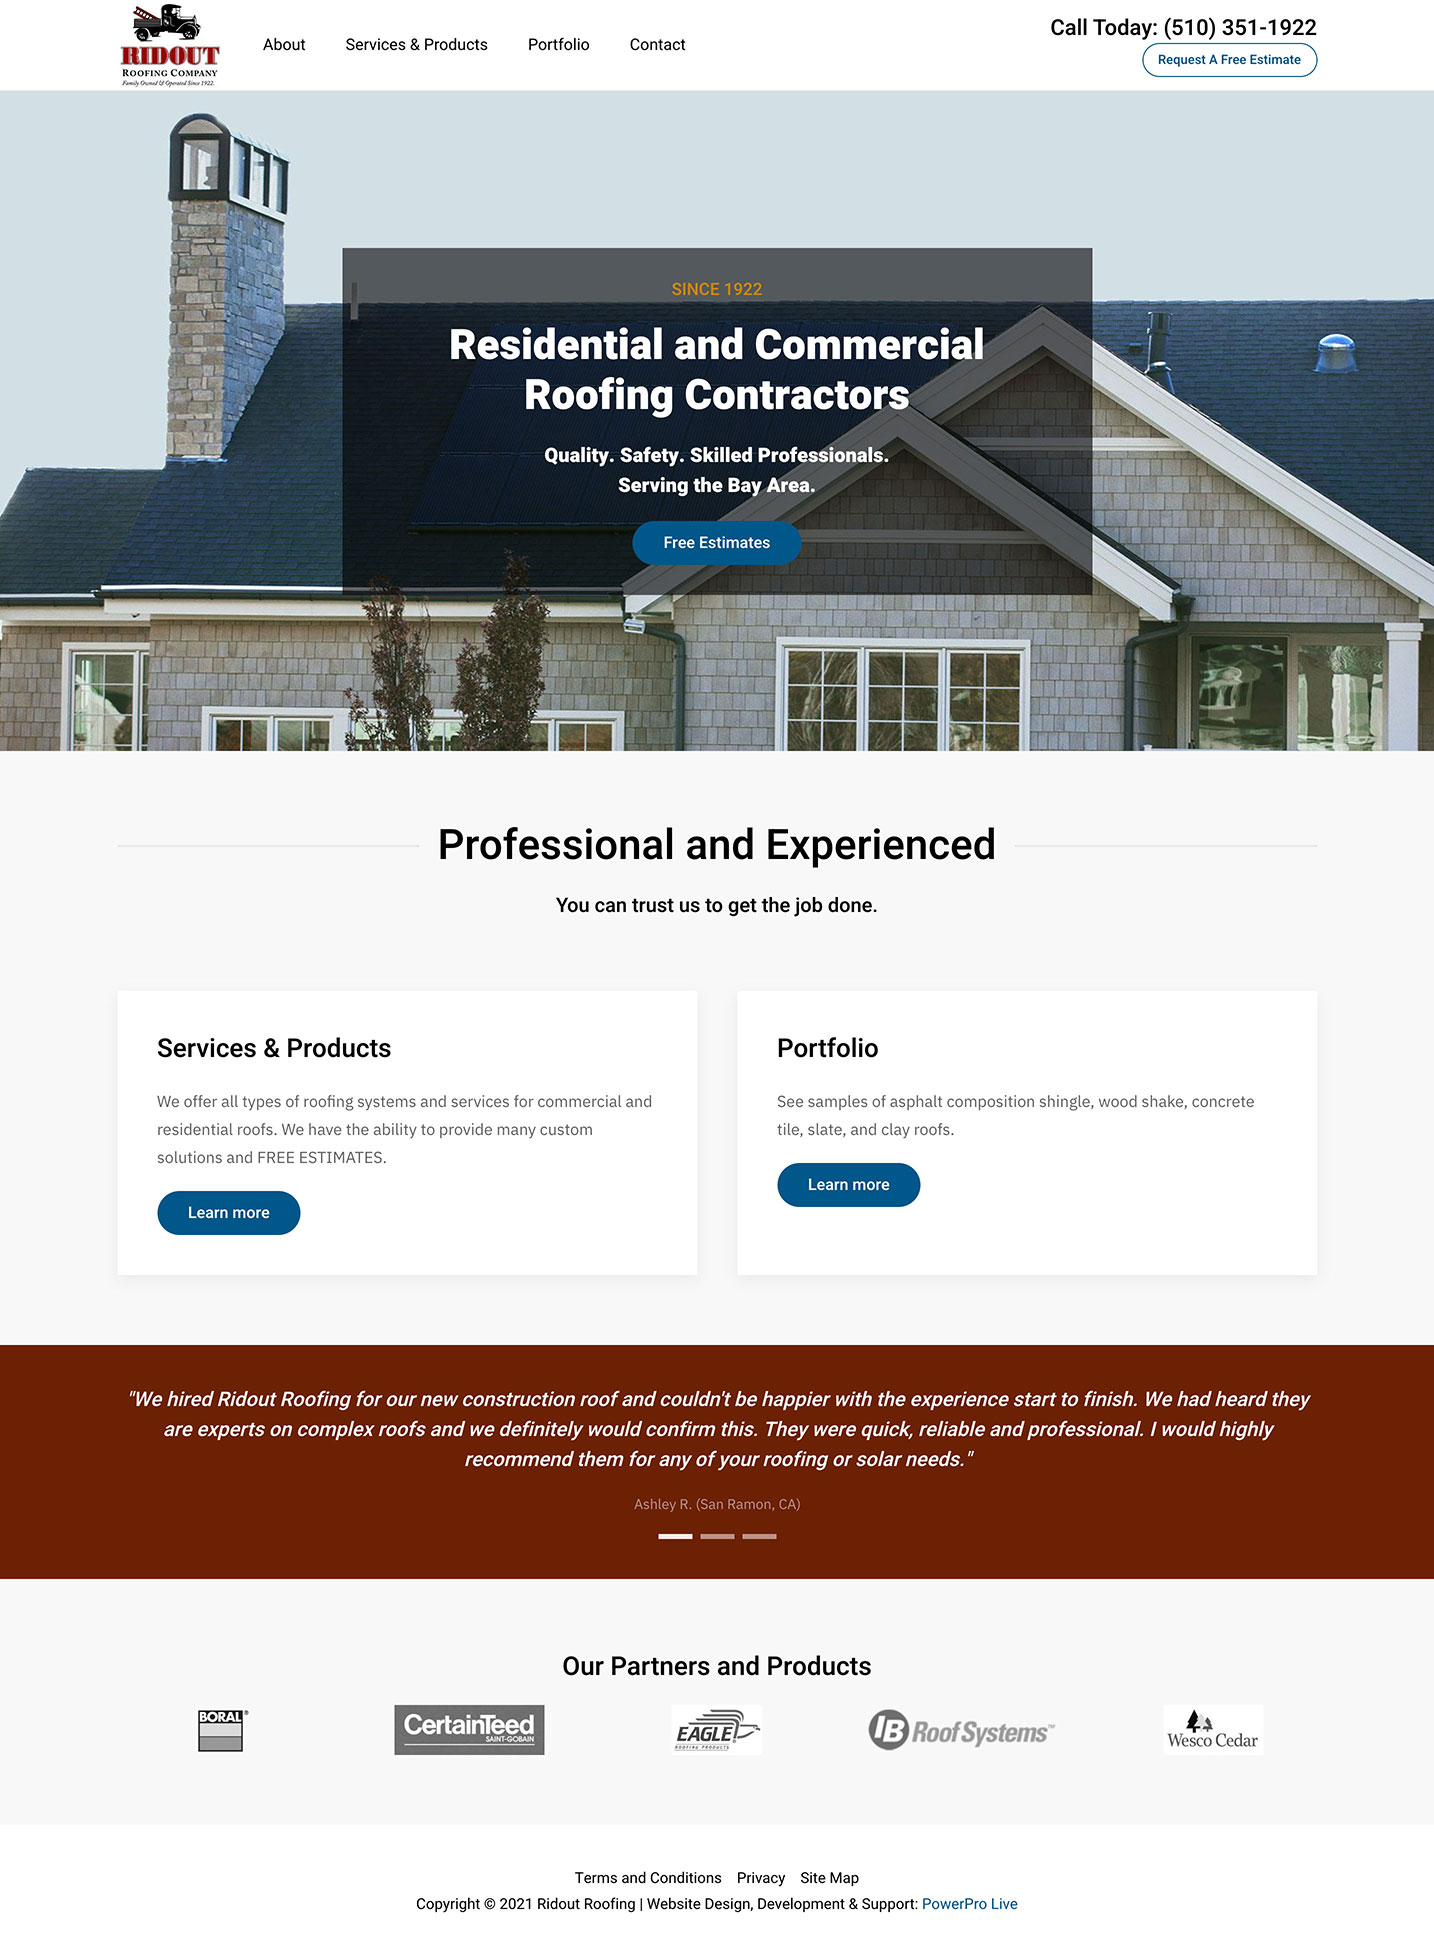 ridout-roofing-website